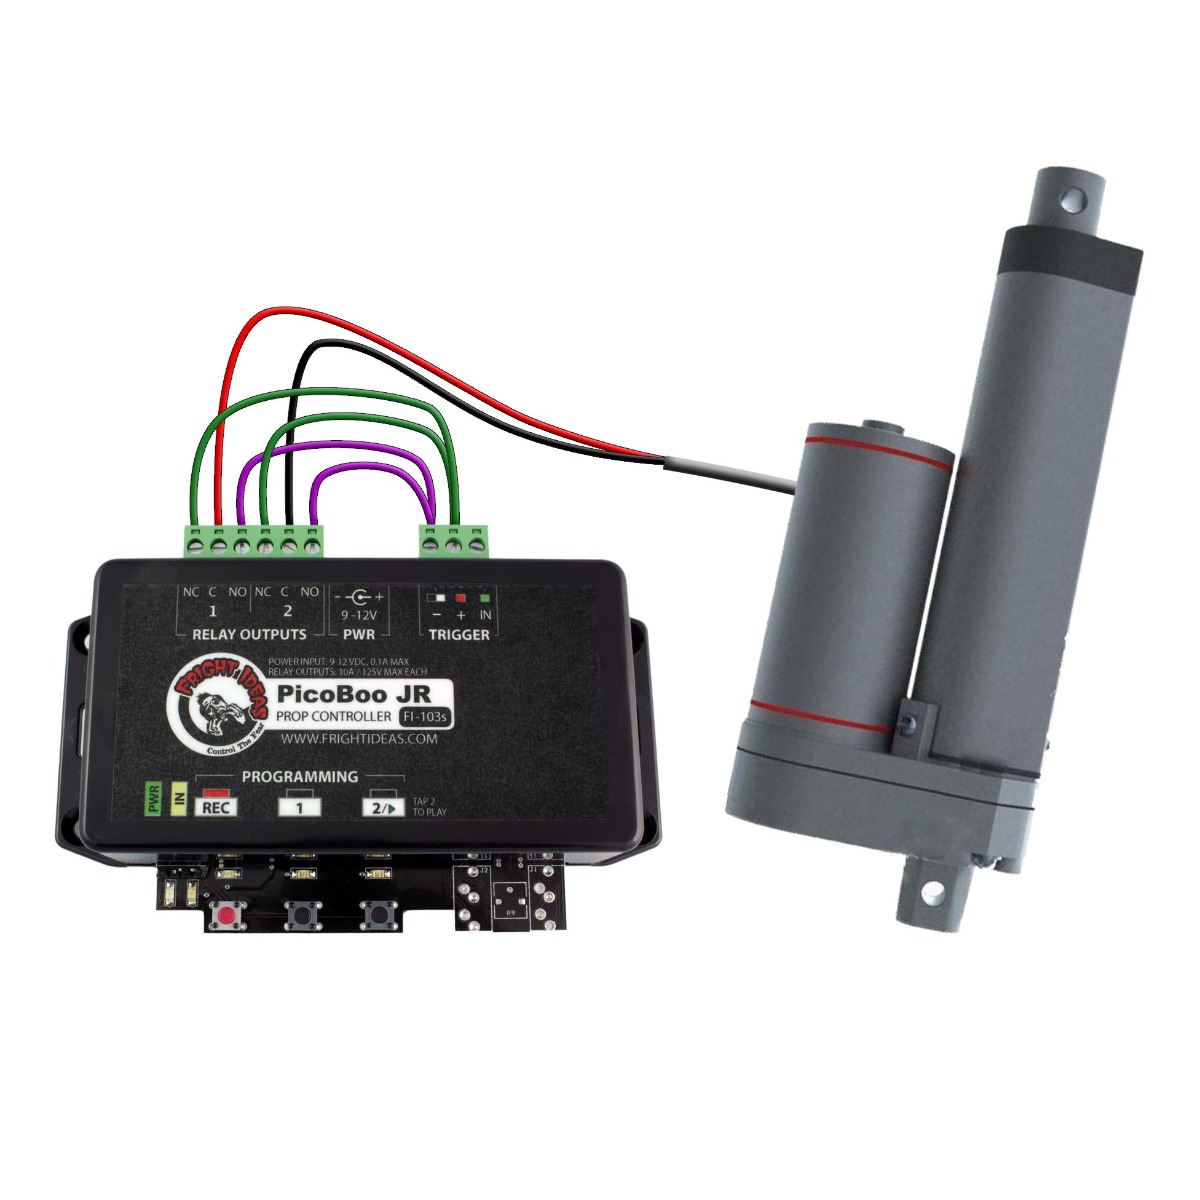 Control a Linear Actuator from a PicoBoo